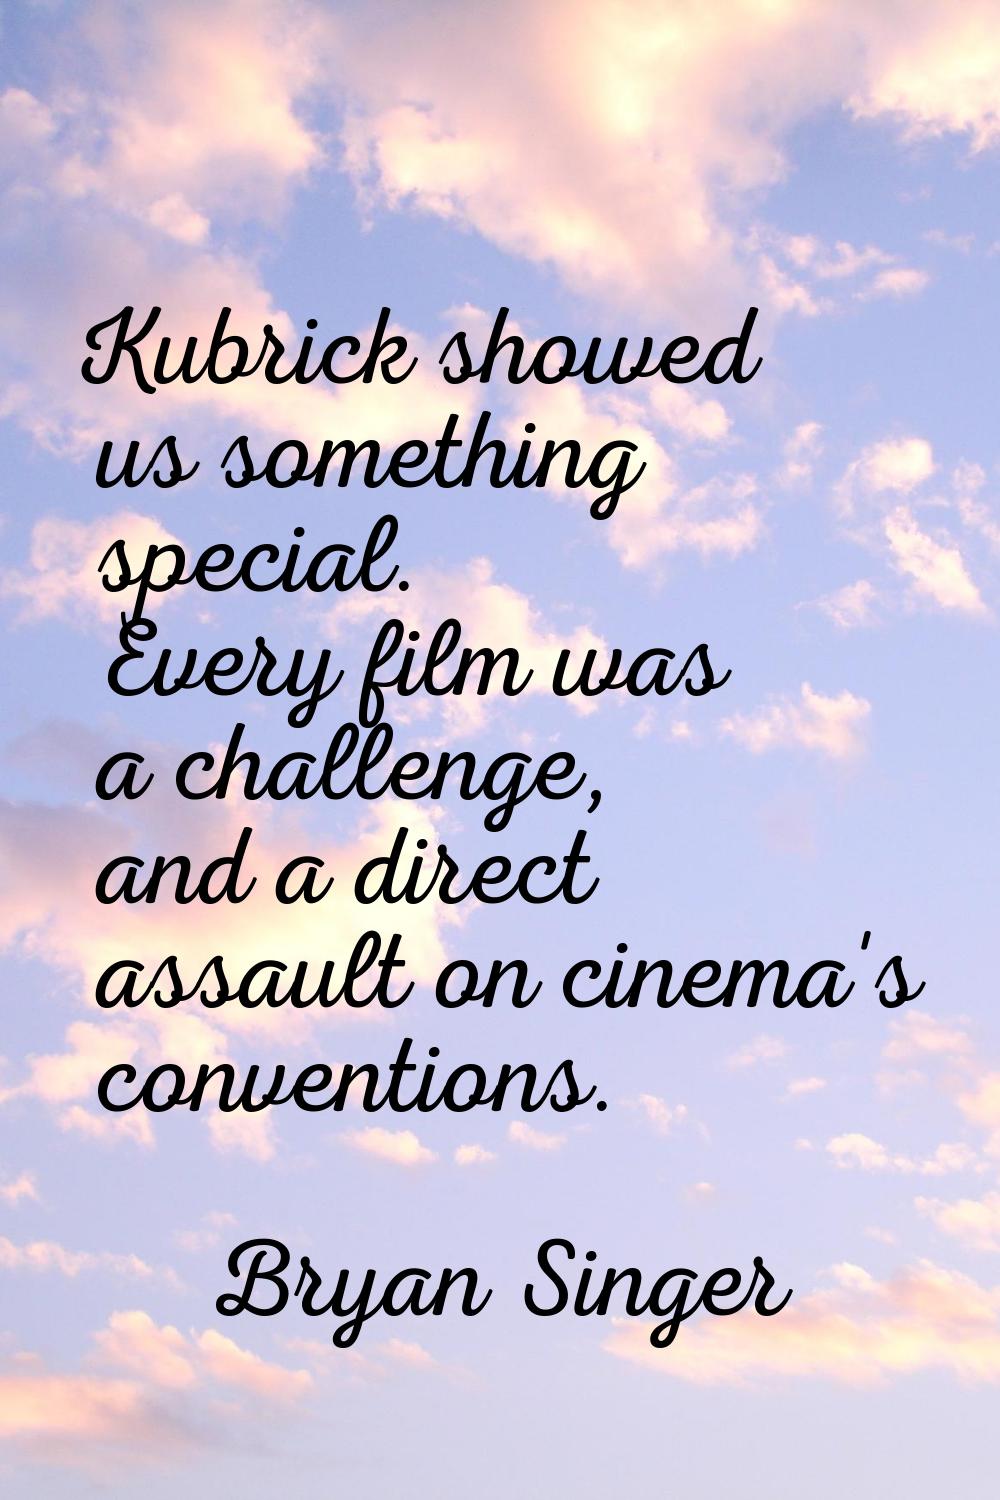 Kubrick showed us something special. Every film was a challenge, and a direct assault on cinema's c